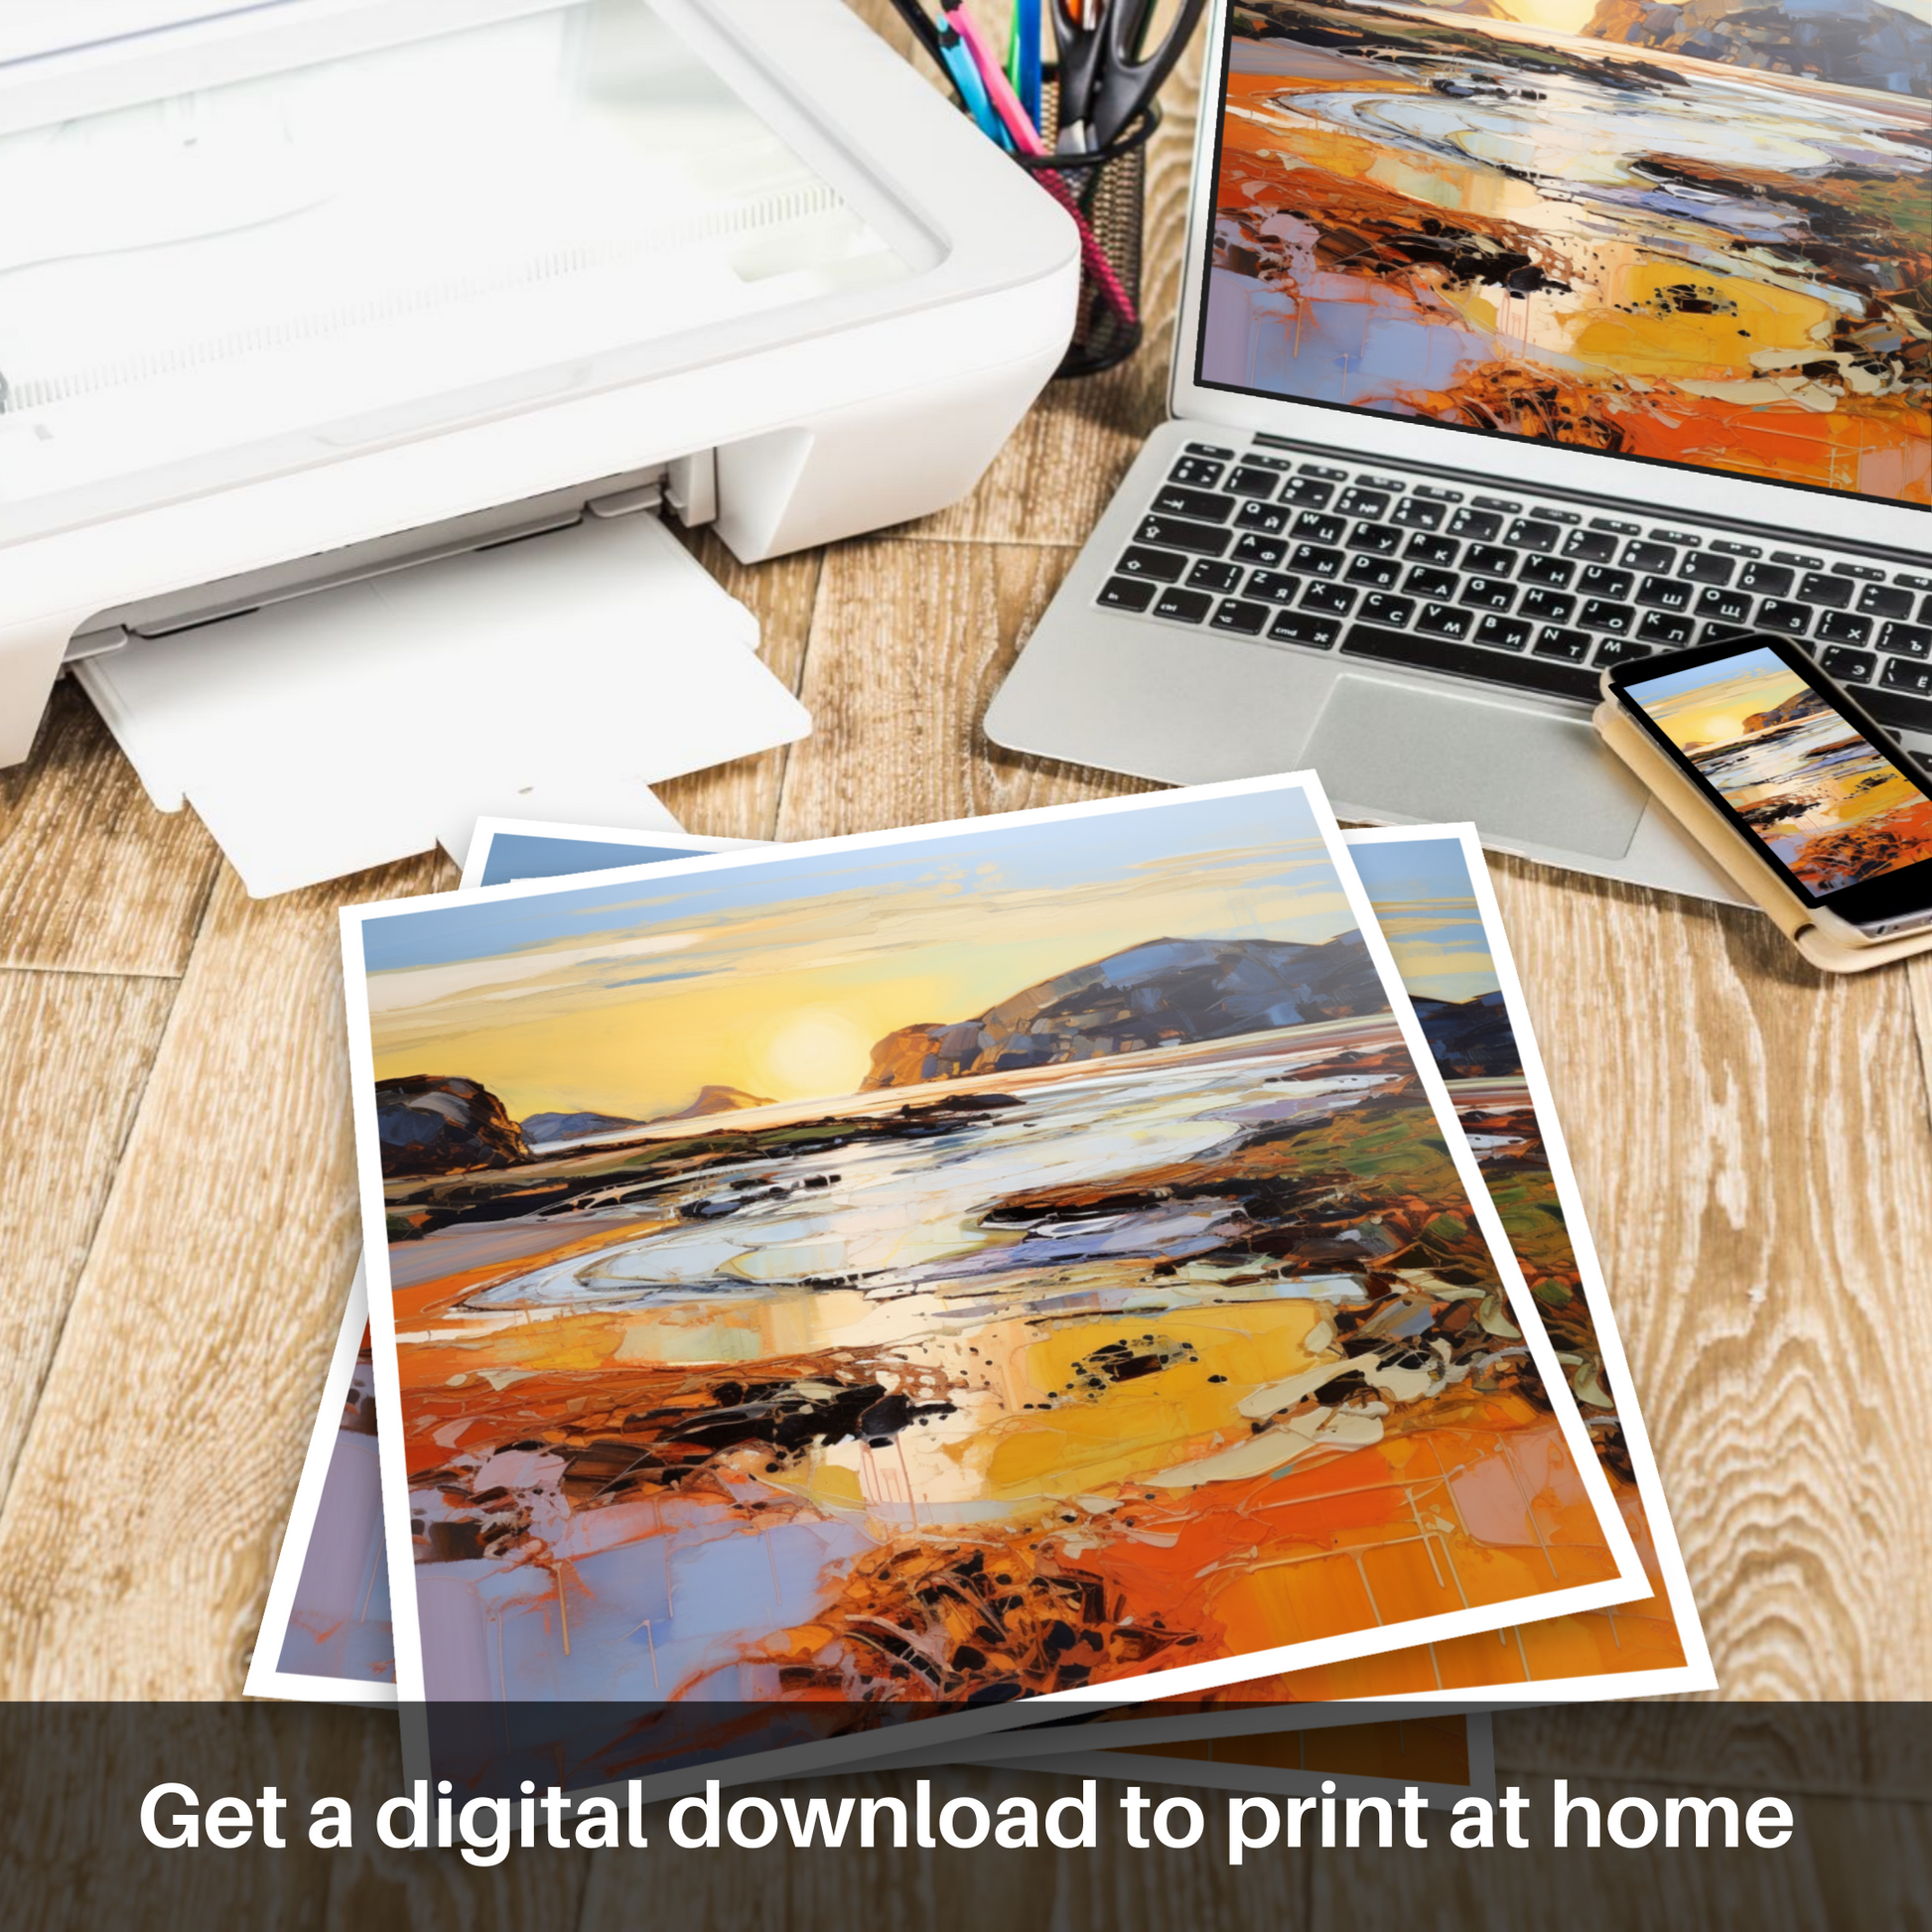 Downloadable and printable picture of Kiloran Bay at golden hour